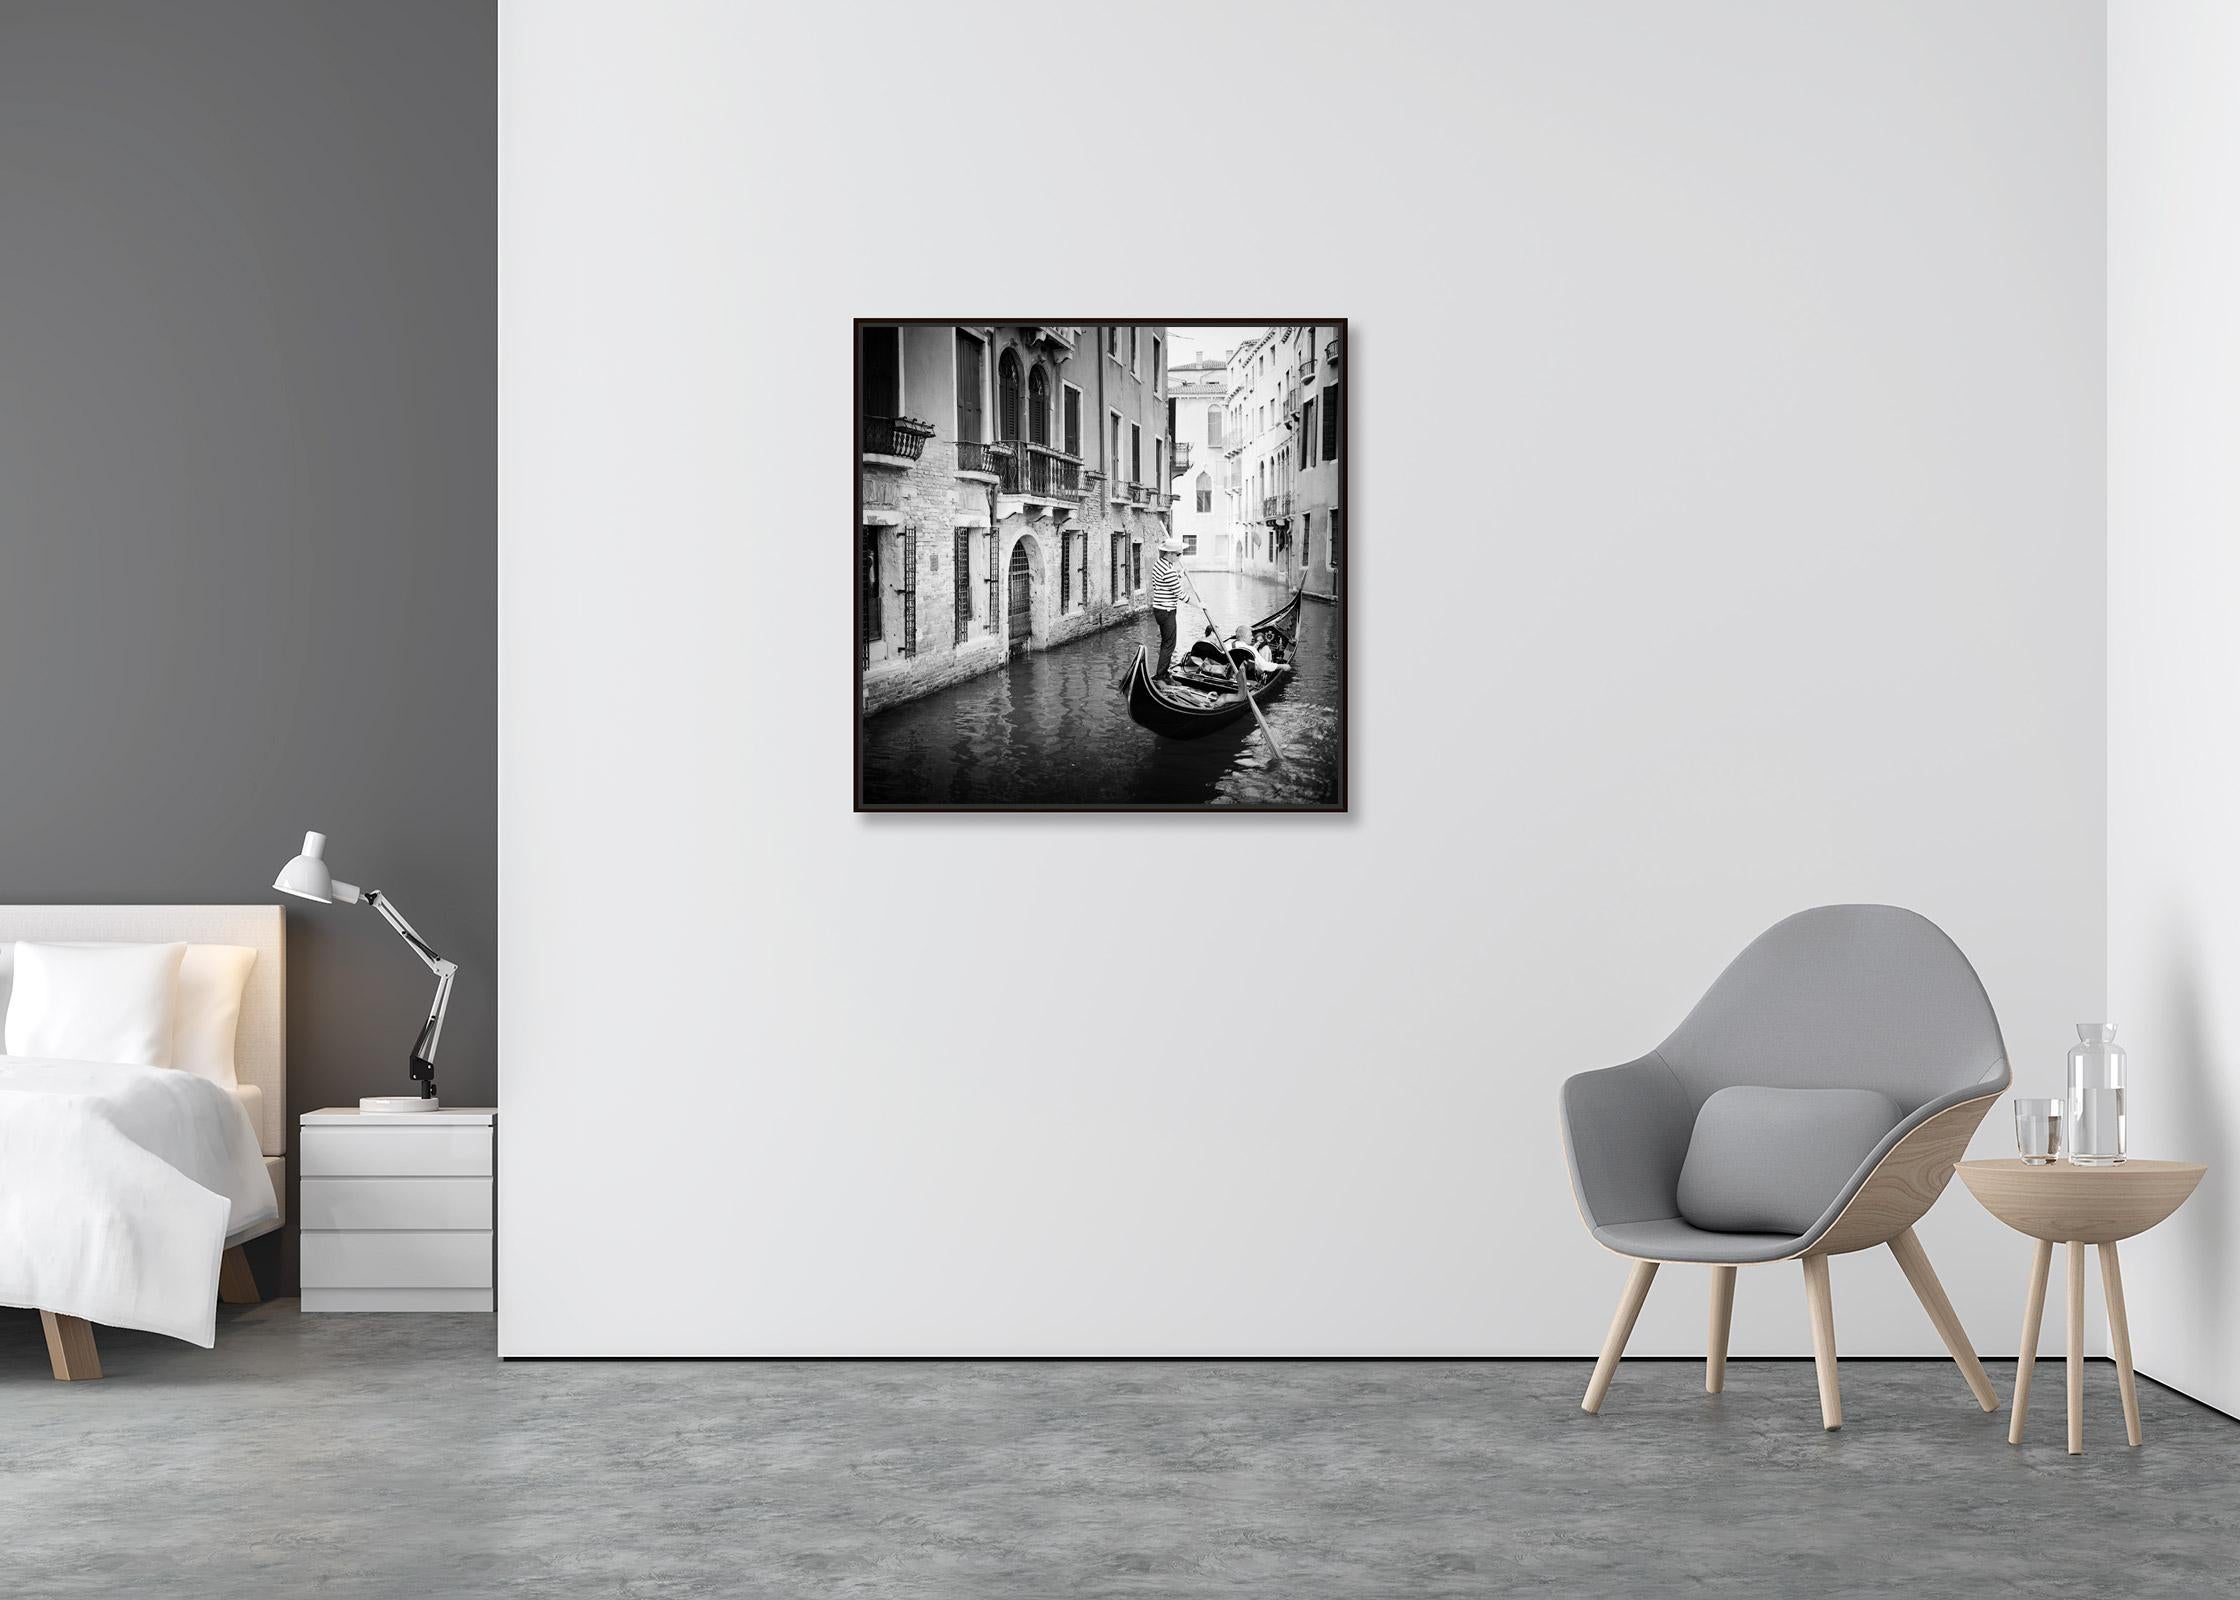 Gondoliere, Gondola, Canal, Venice, black and white art cityscape photography - Contemporary Photograph by Gerald Berghammer